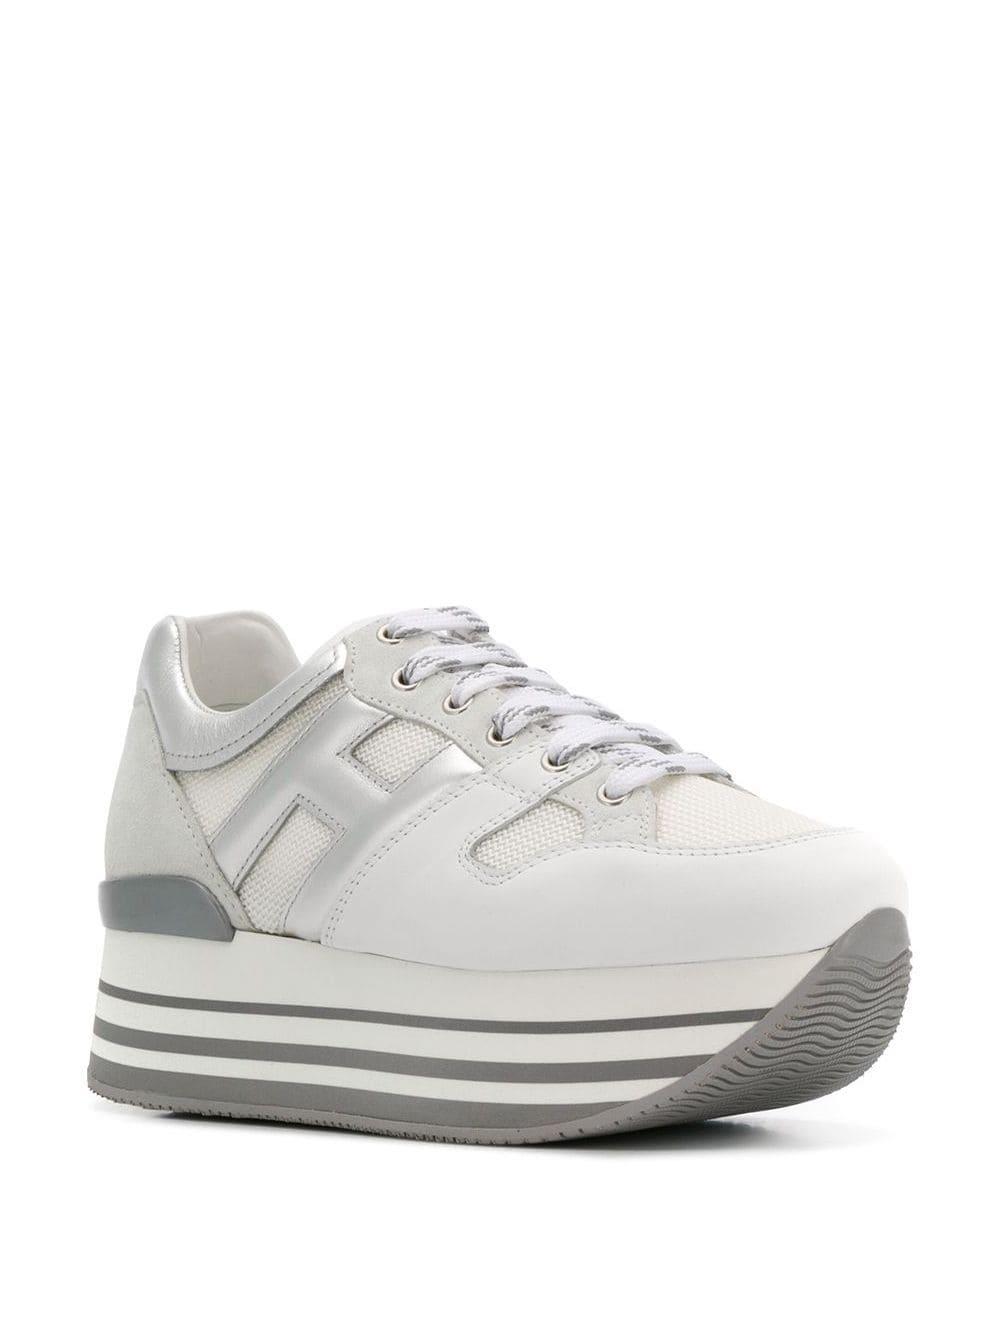 Hogan Leather Maxi Platform Sneakers in White - Lyst